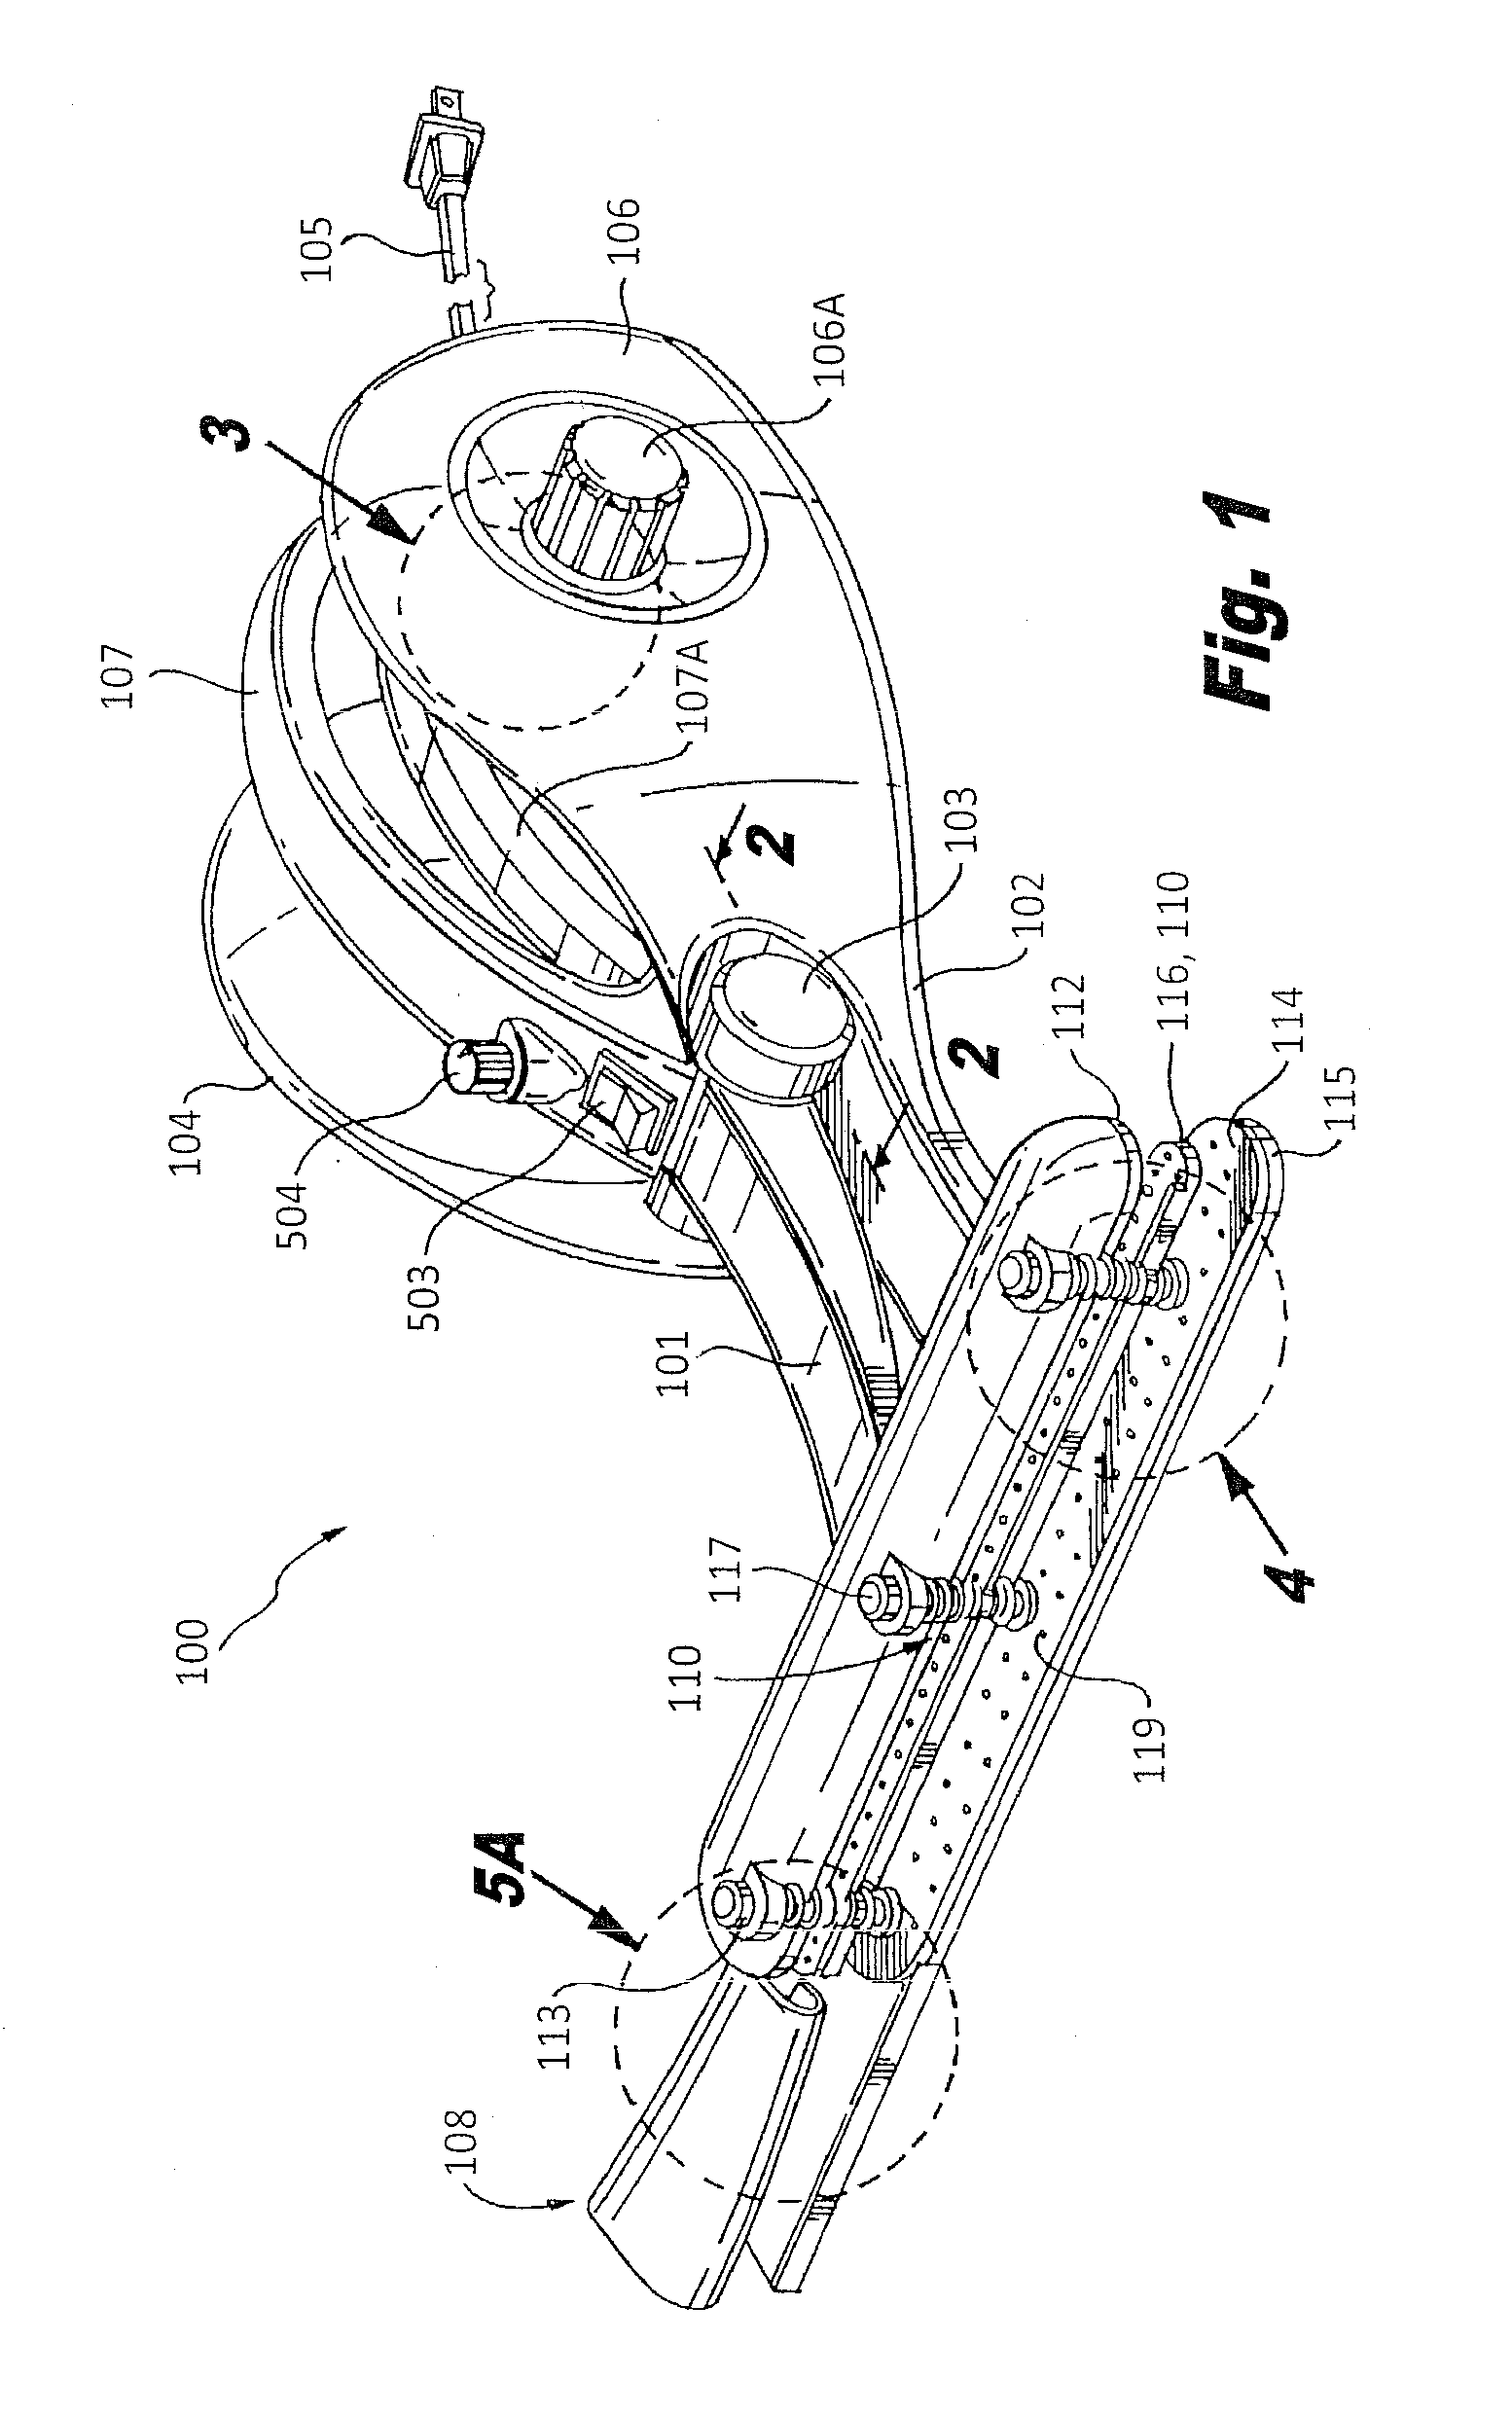 System and apparatus for creating a hem